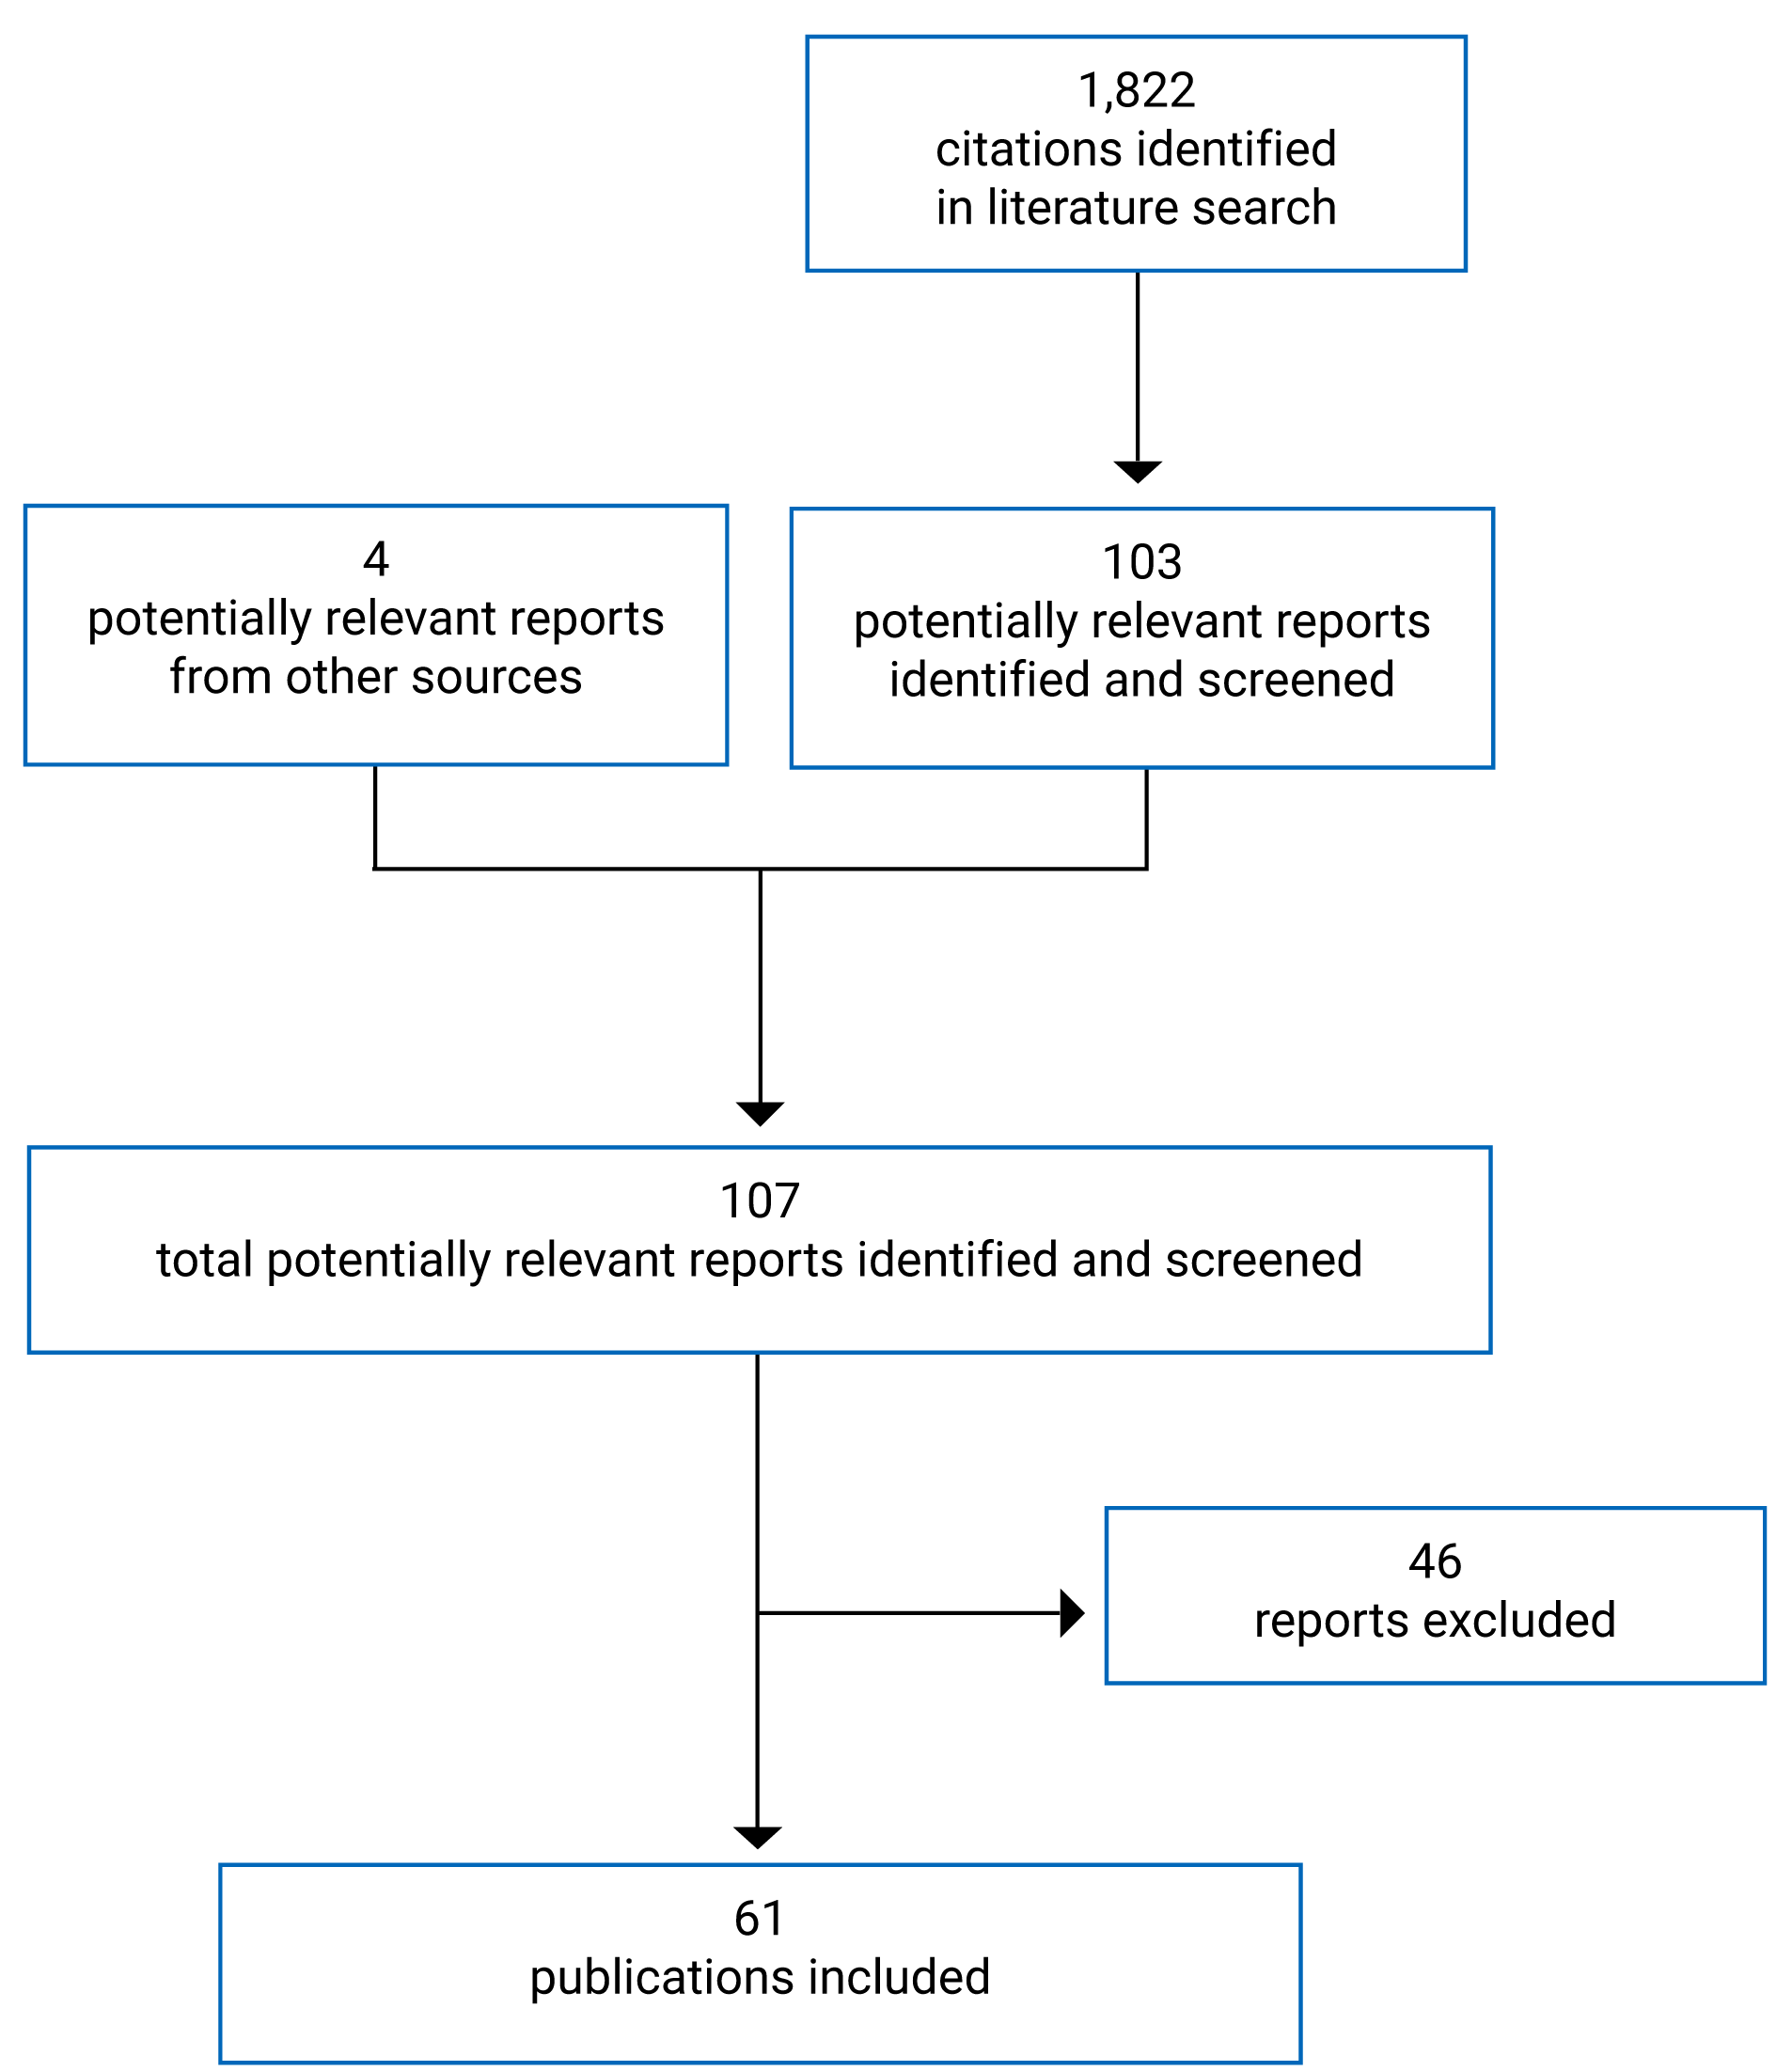 Diagram of selection criteria for included publications. 1,822 citations were identified in the initial literature search. 103 of these were determined to be potentially relevant, as were 4 other potentially relevant publications from other sources, yielding 107 potentially relevant publications. 46 of these were excluded, and a total of 61 publications were included.